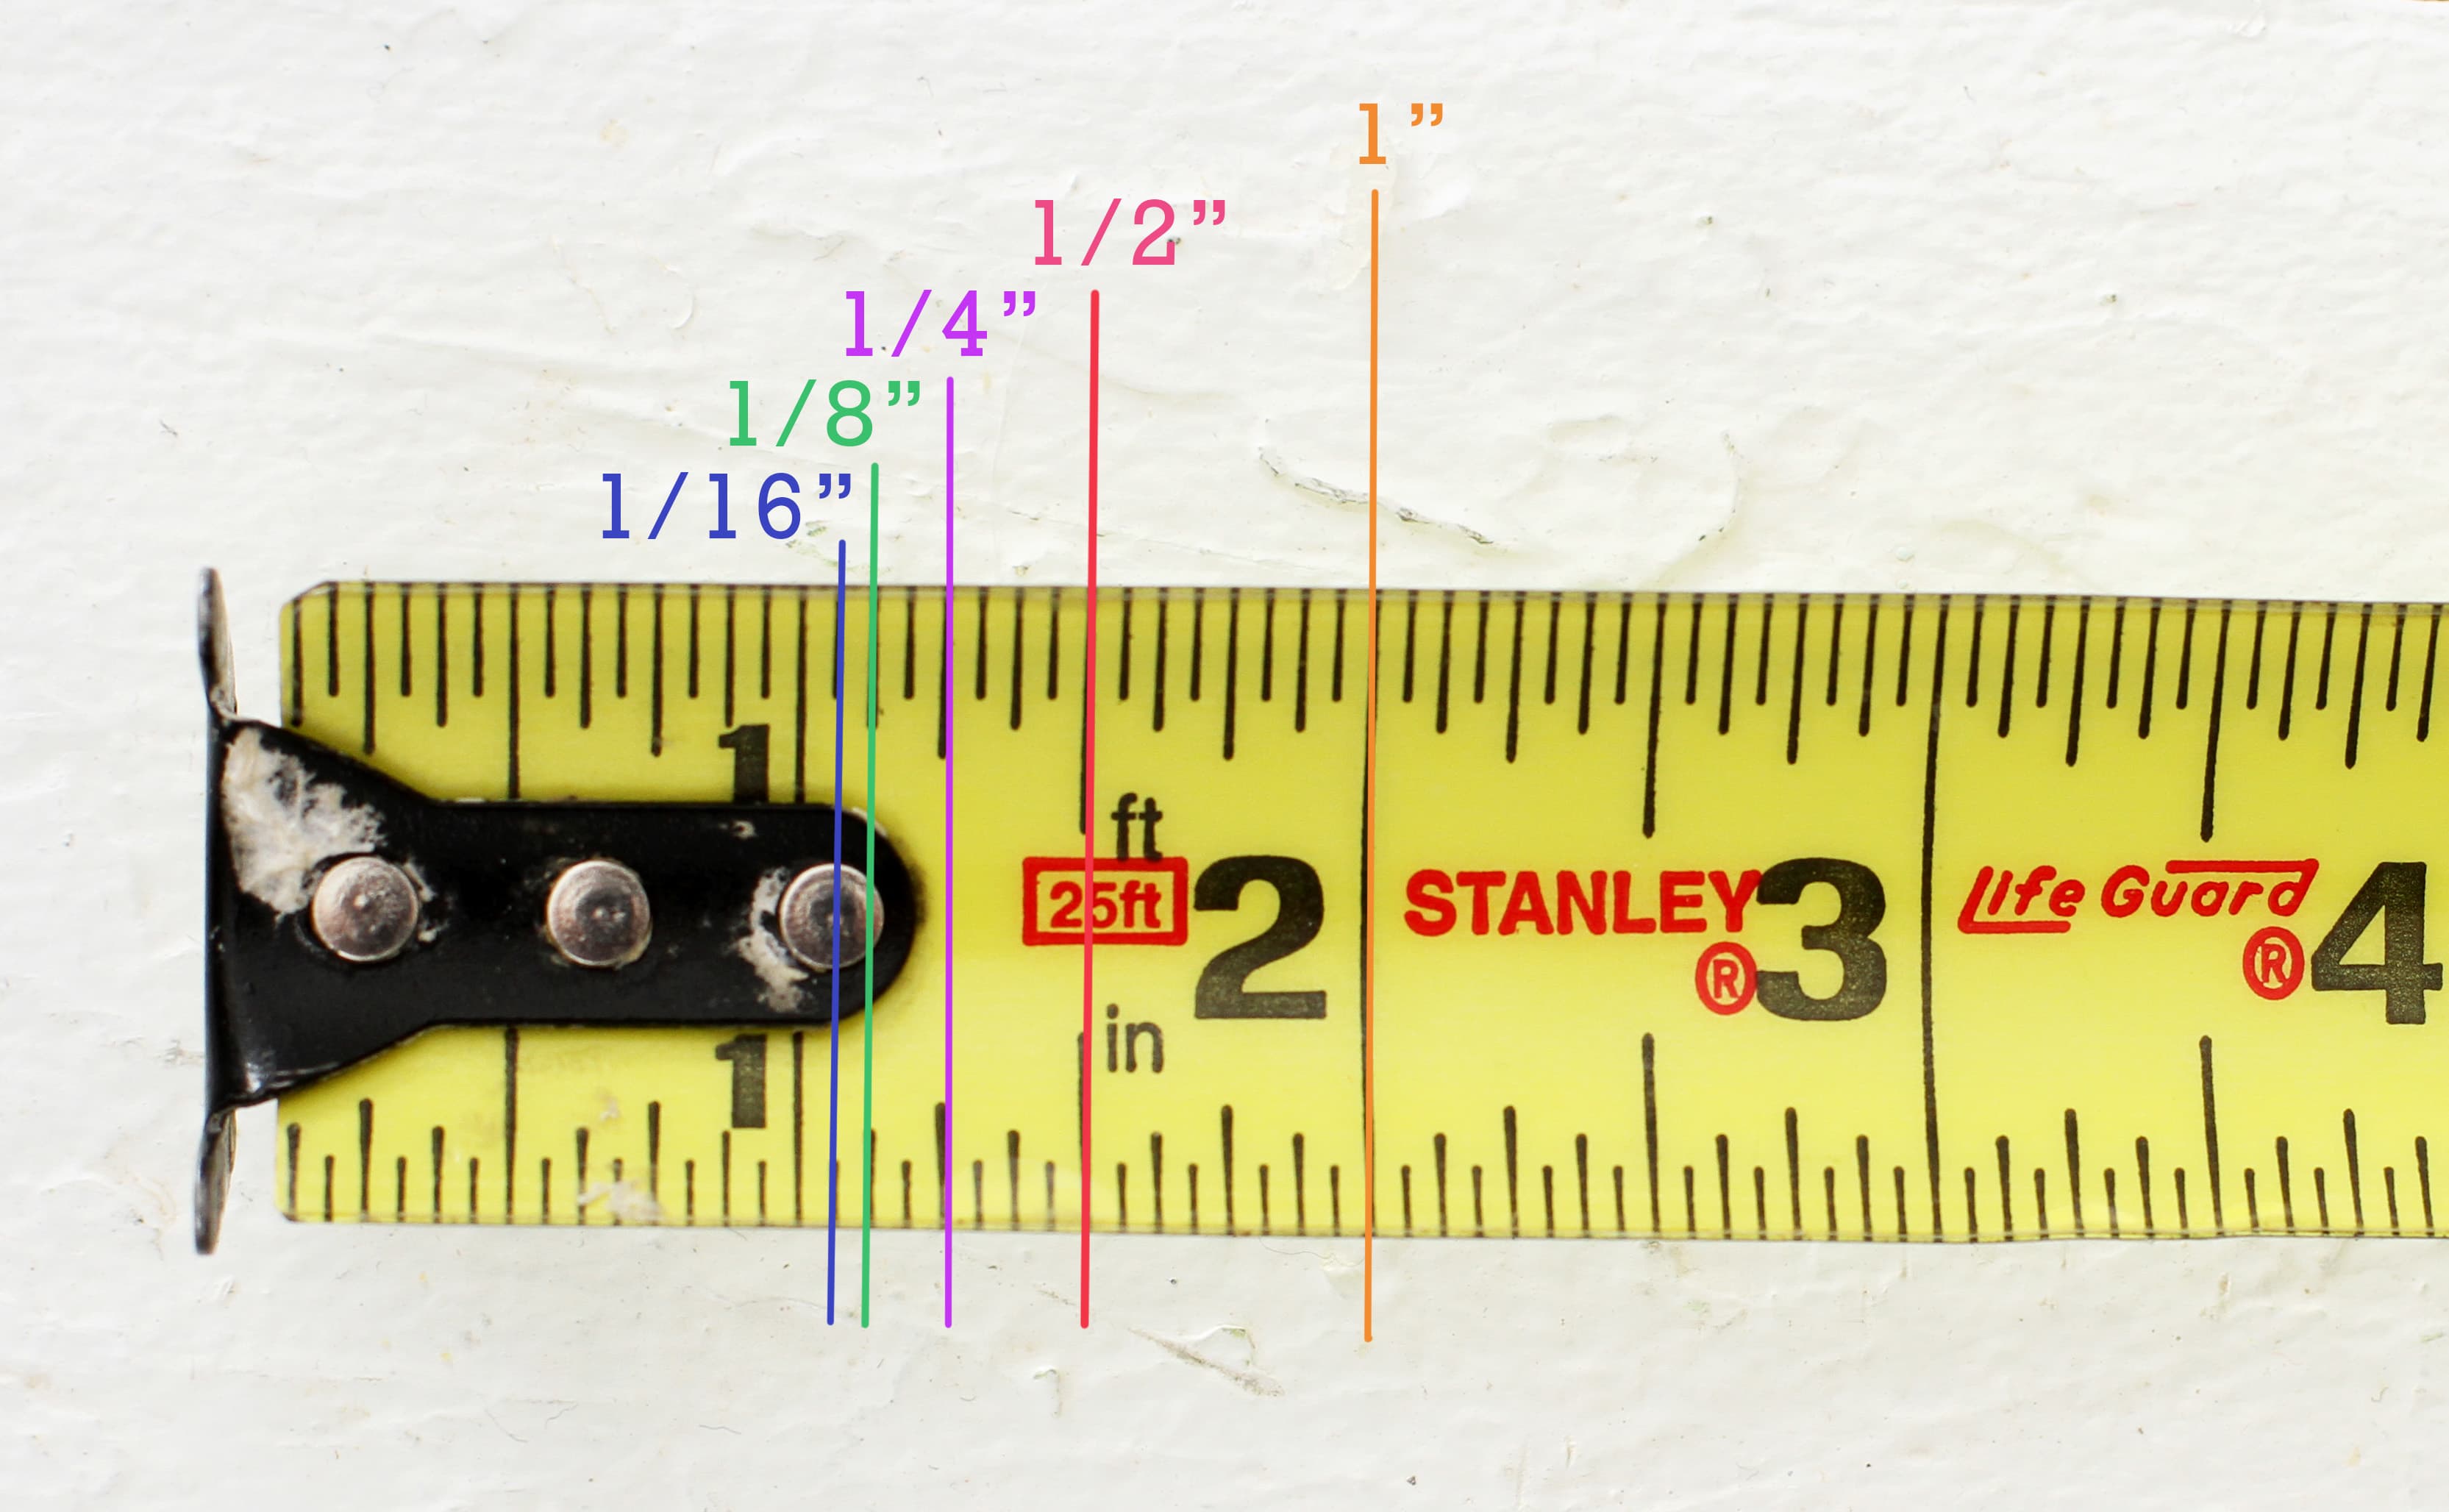 All About Tape Measure for Sewing: Ultimate Guide